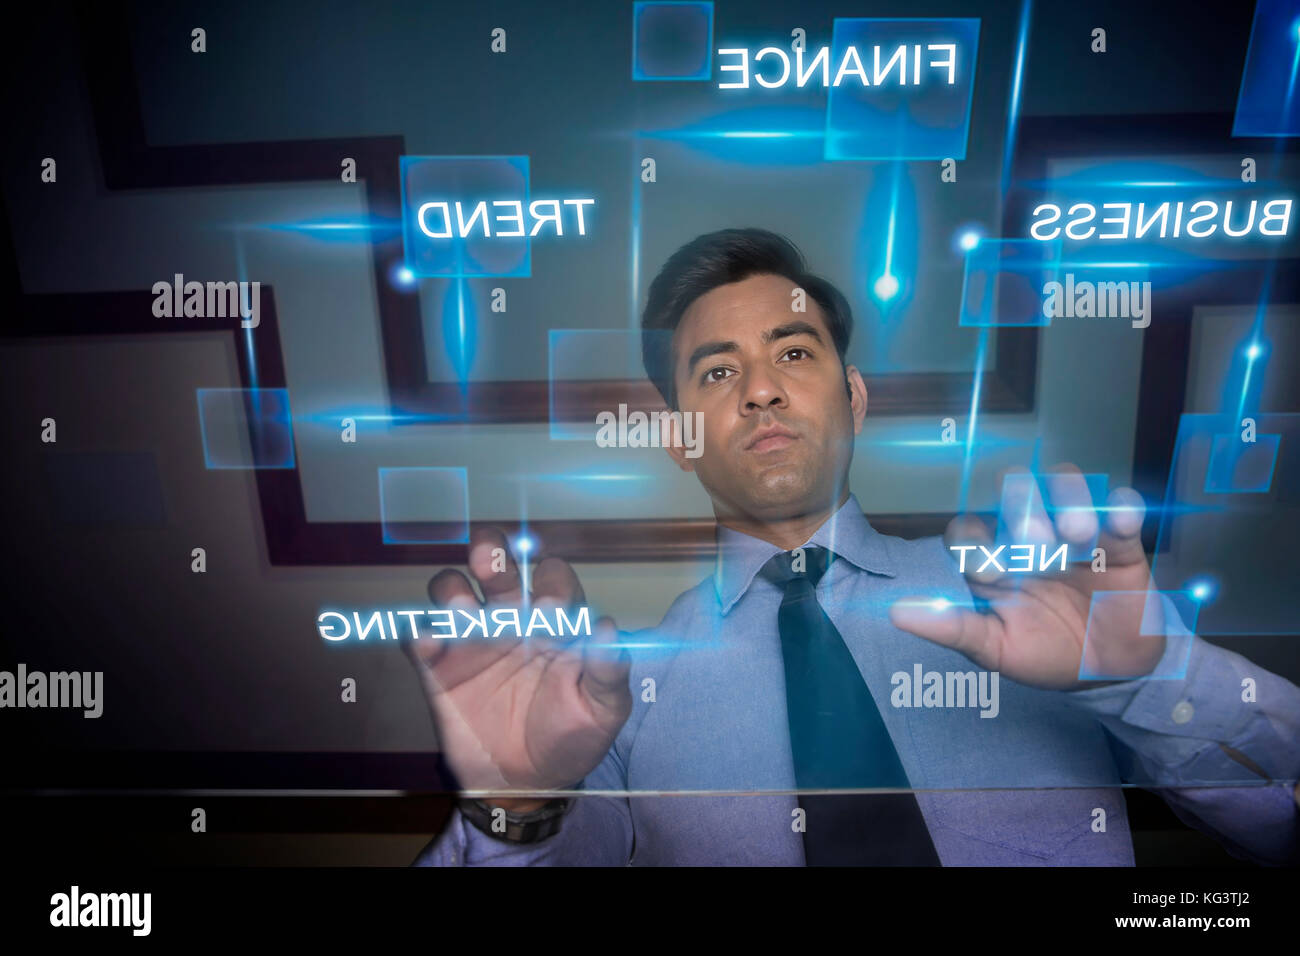 Businessman using futuristic computer keyboard Banque D'Images